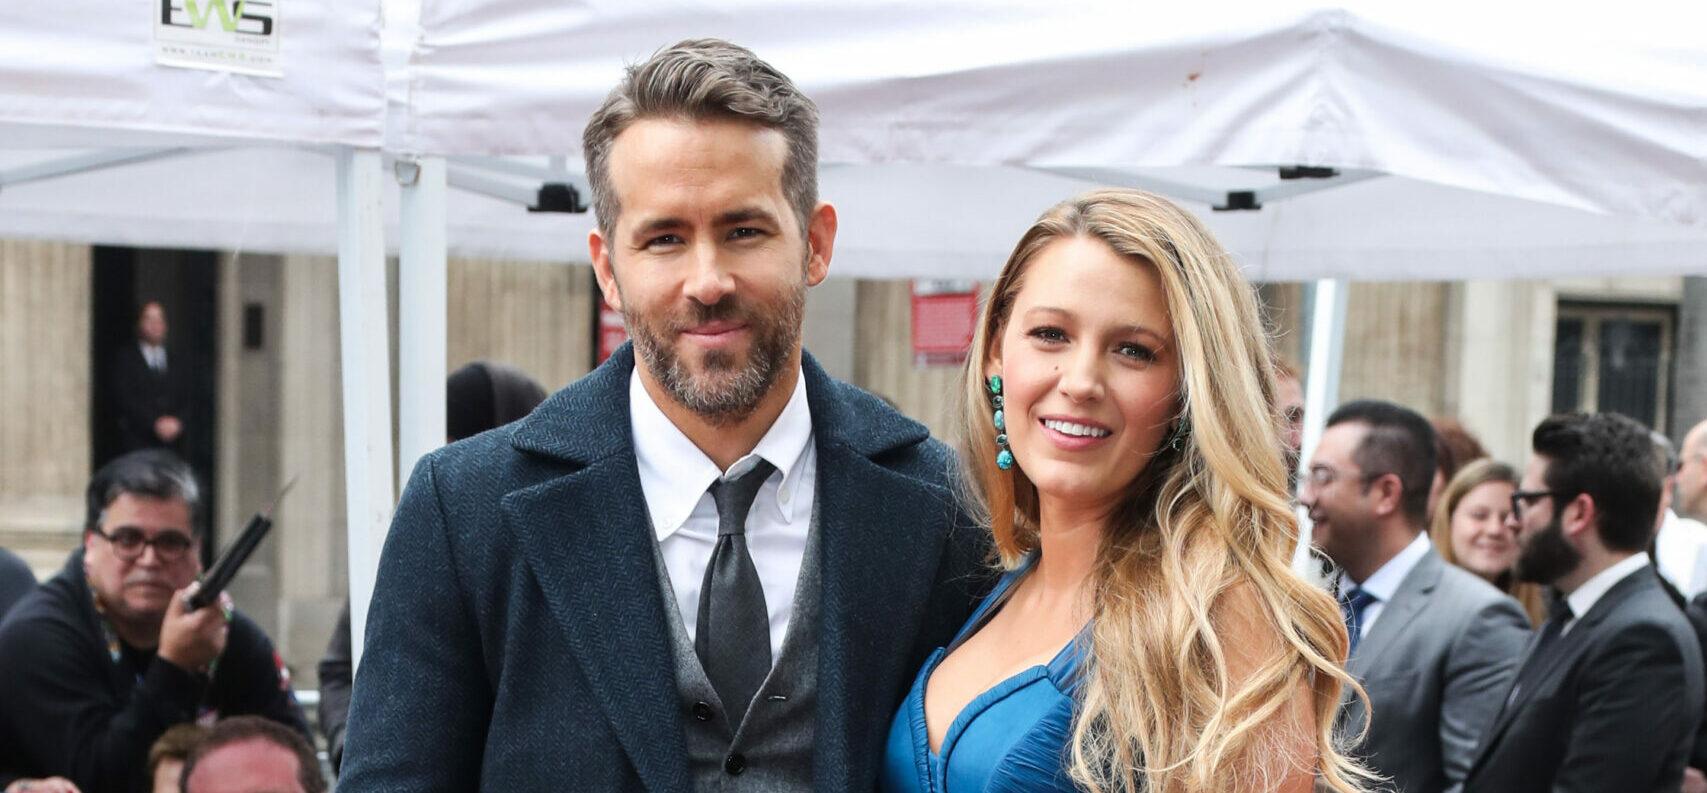 Ryan Reynolds Working To ‘Create More Space’ For Family During Acting Sabbatical